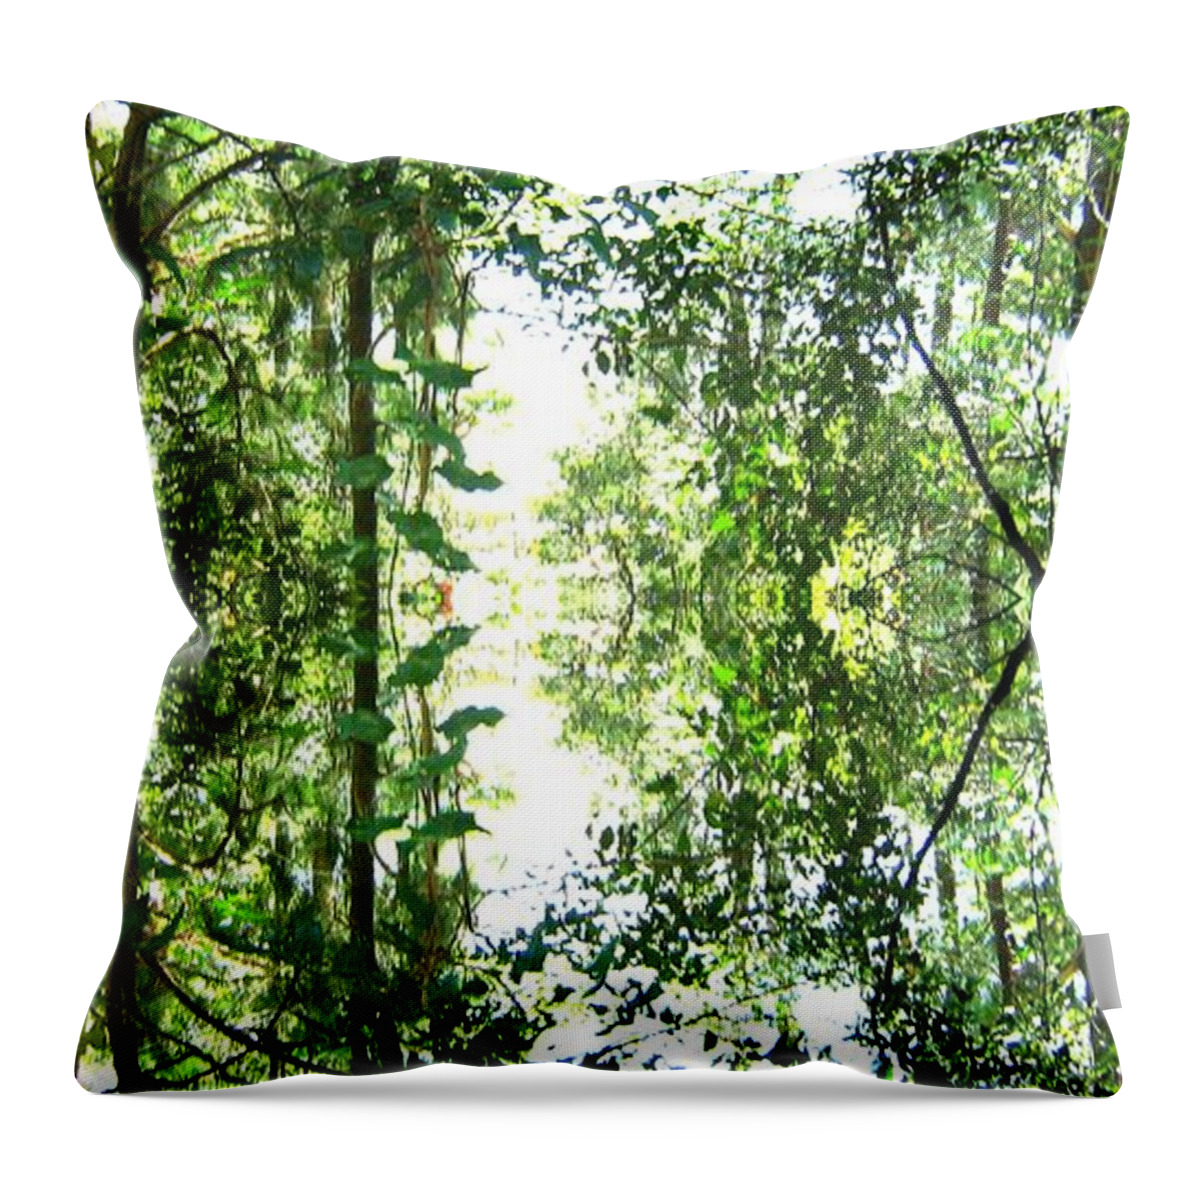 Bushland Throw Pillow featuring the mixed media Mirrored Green by Leanne Seymour